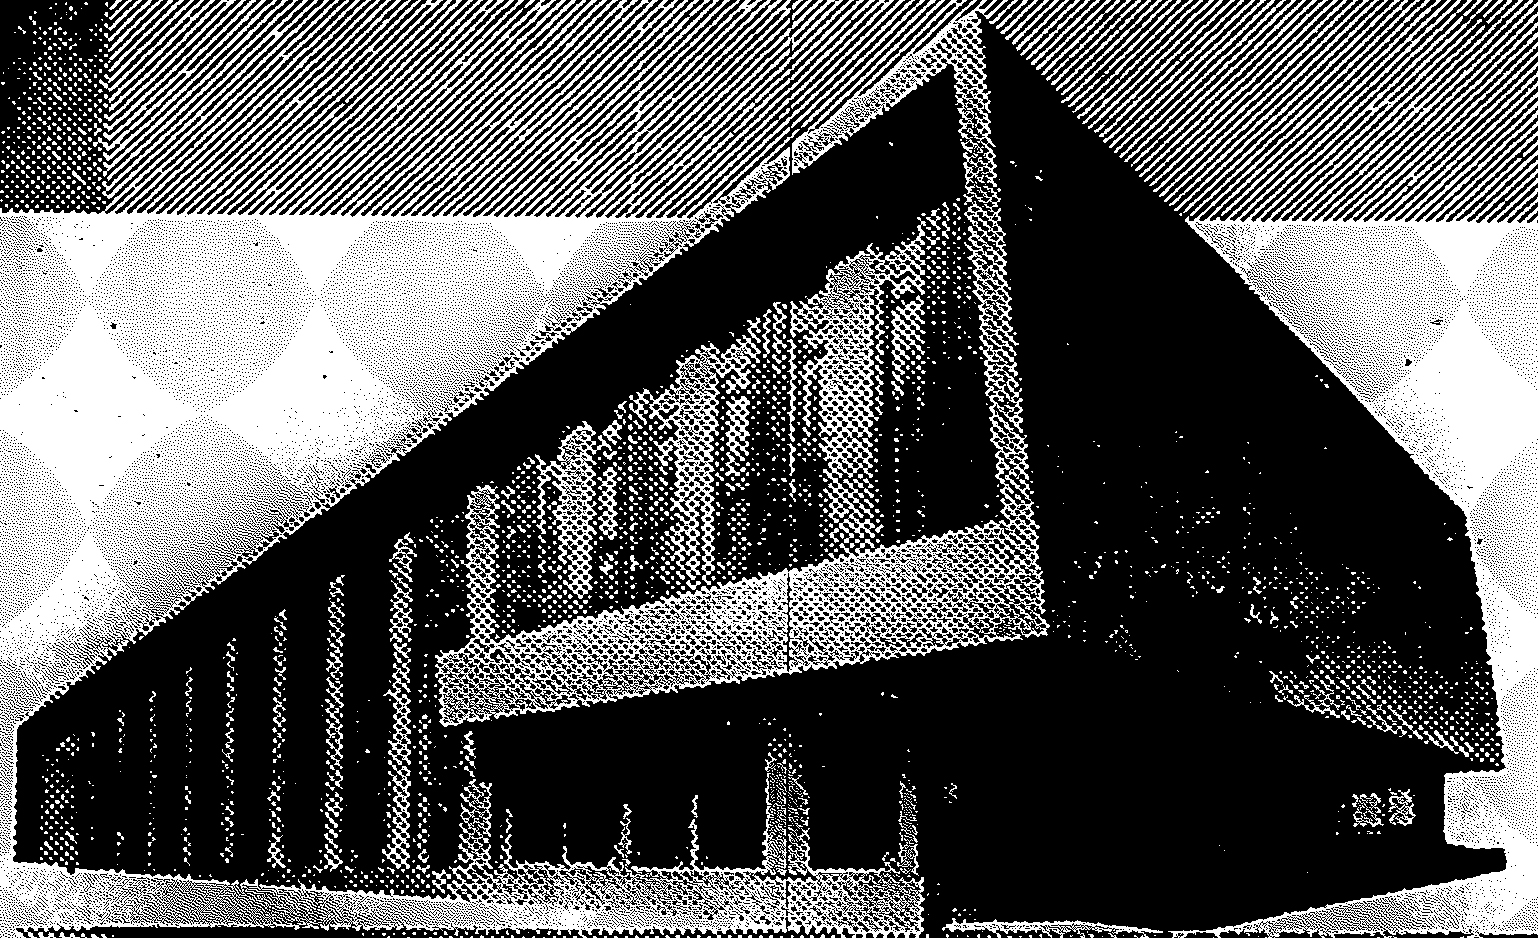 Jefferson Bank & Trust Co. STL MO 1956 from The American Banker Reprinted with Permission from SourceMedia.jpg